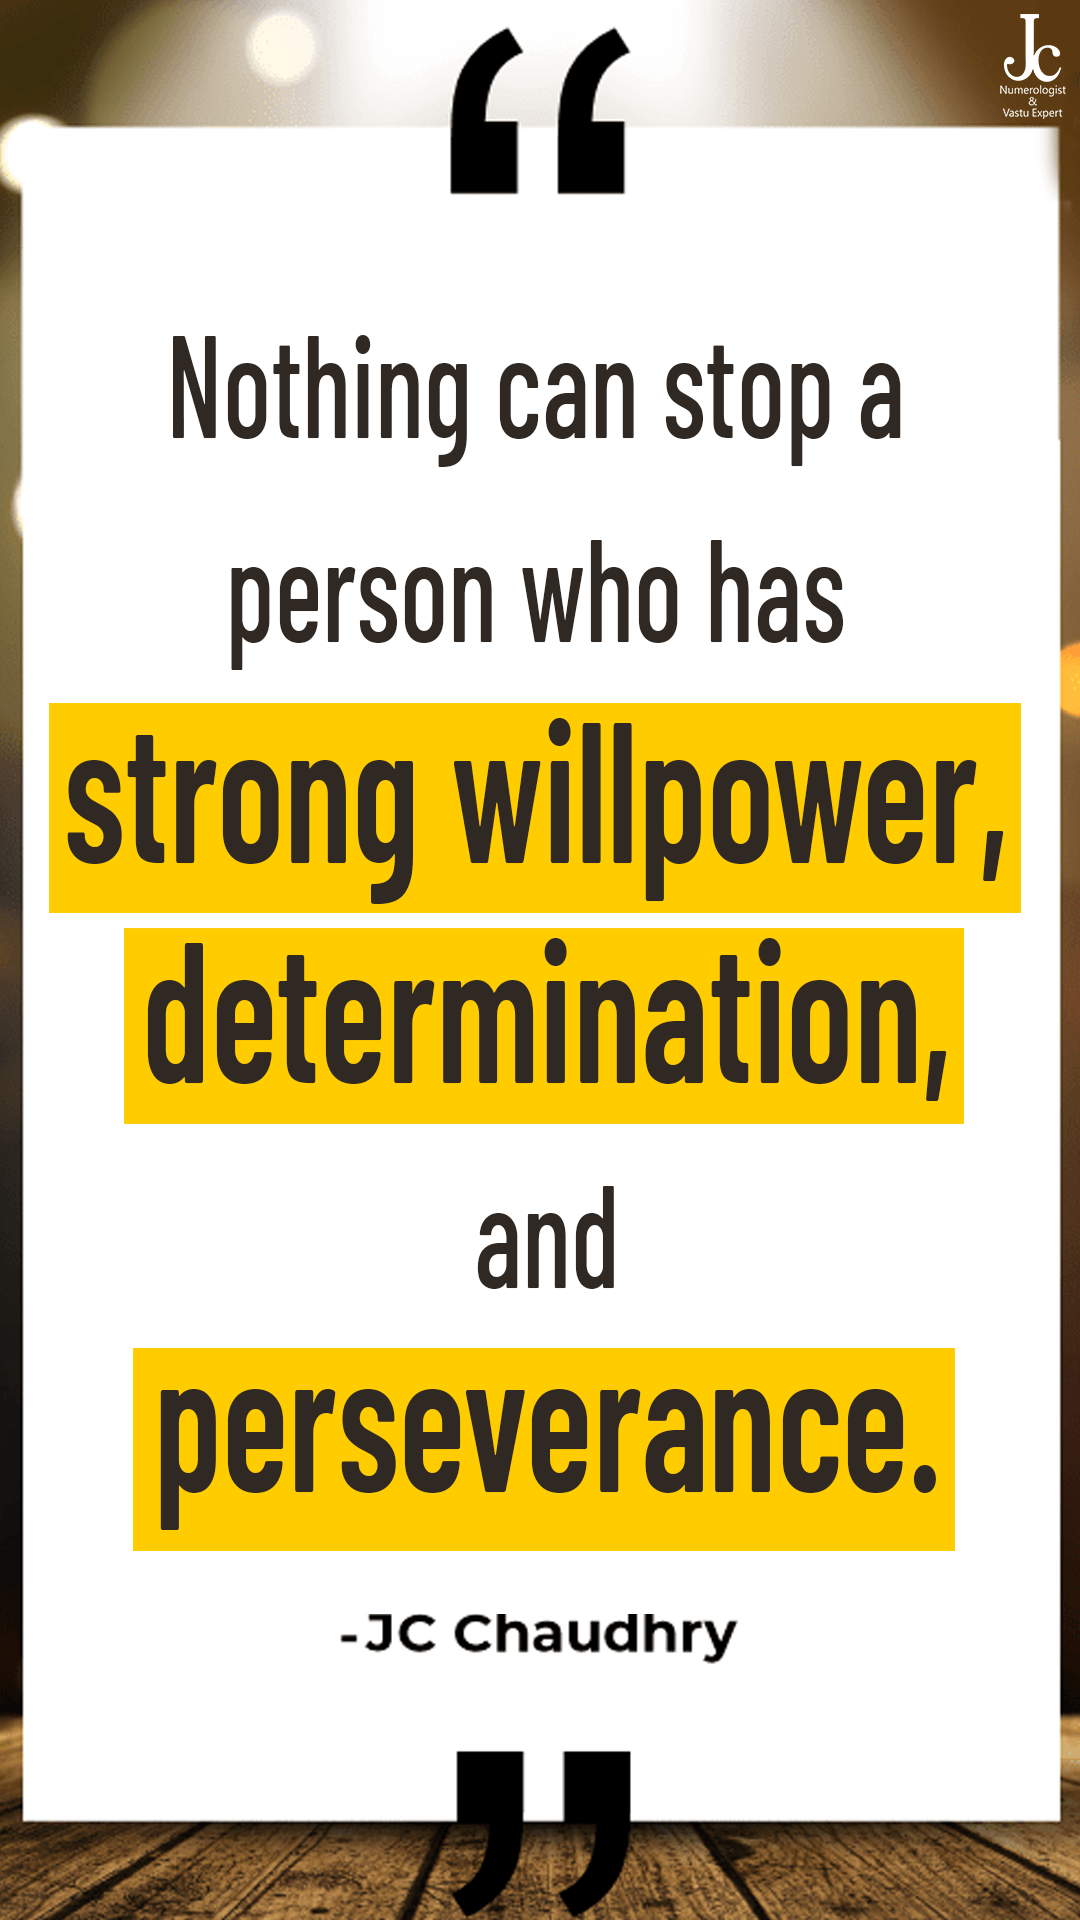 Nothing can stop a person who has strong will power, determination, and perseverance.